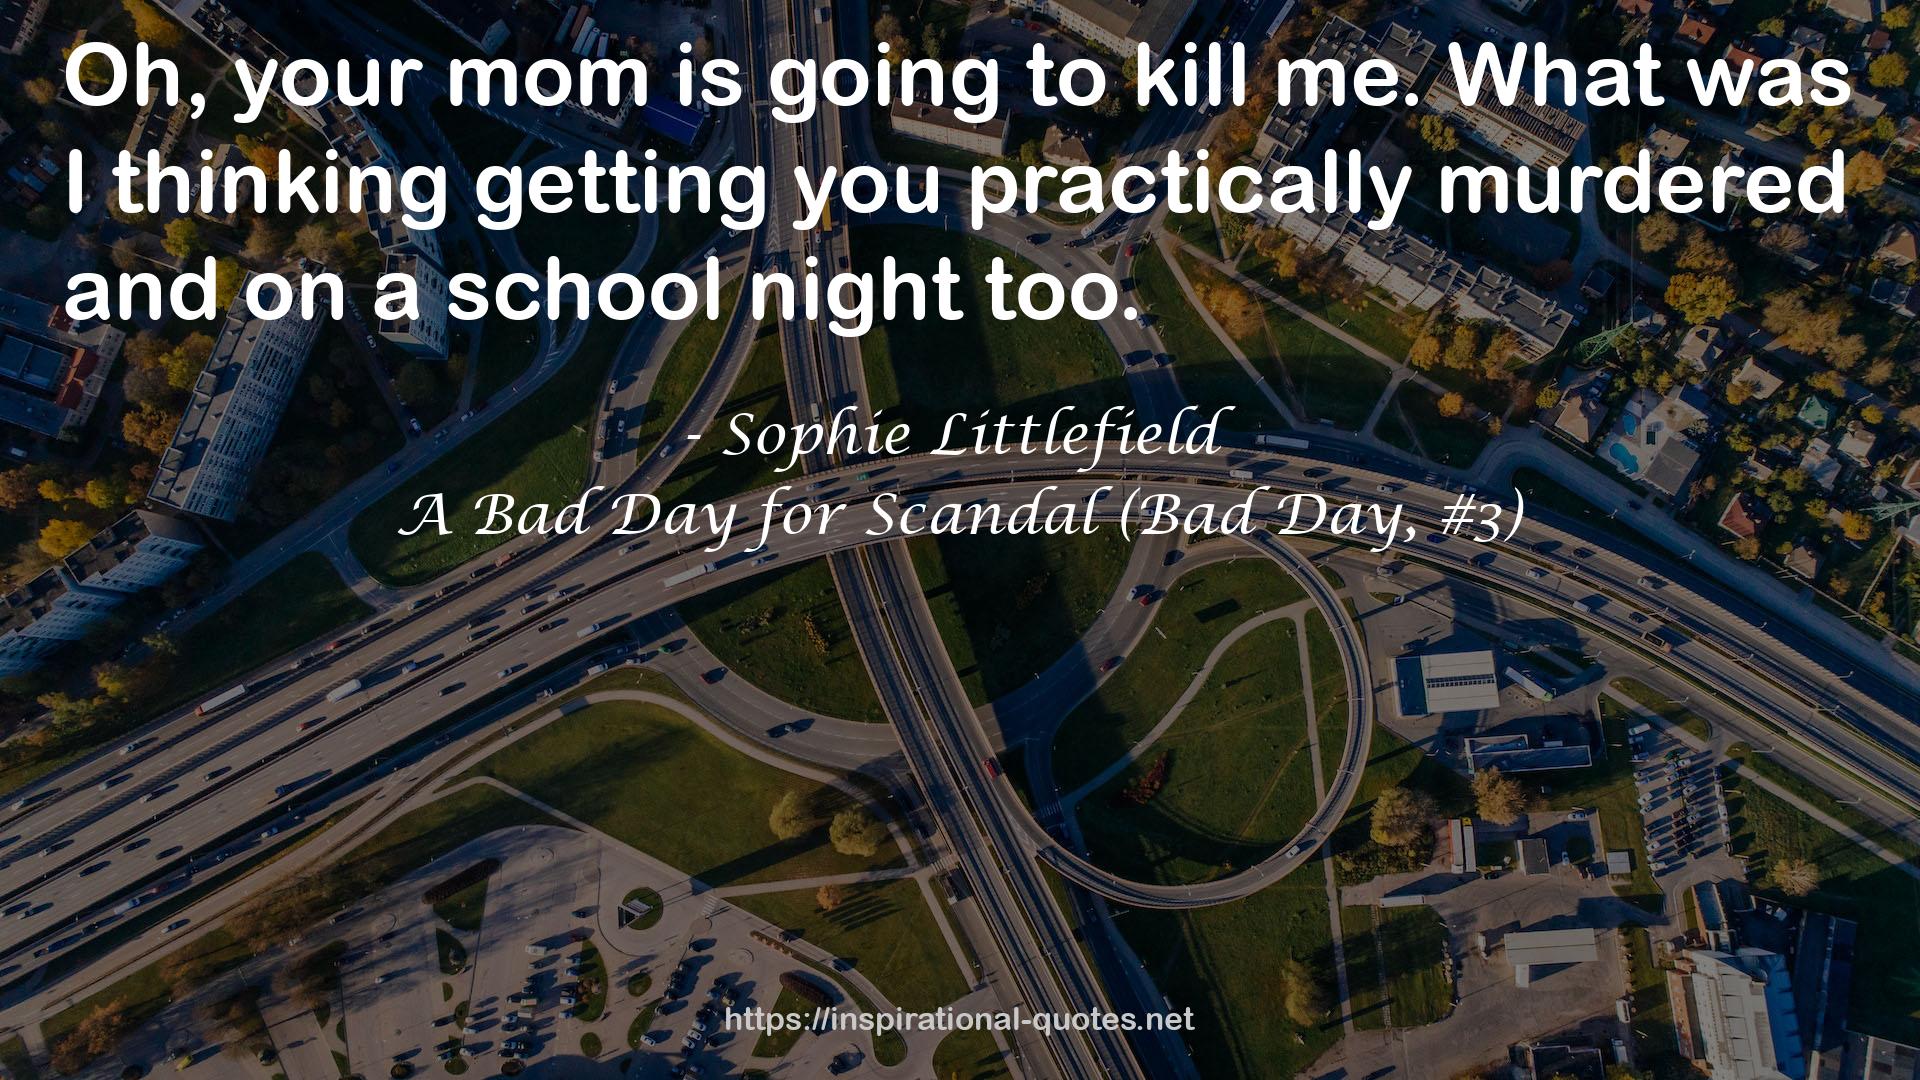 A Bad Day for Scandal (Bad Day, #3) QUOTES